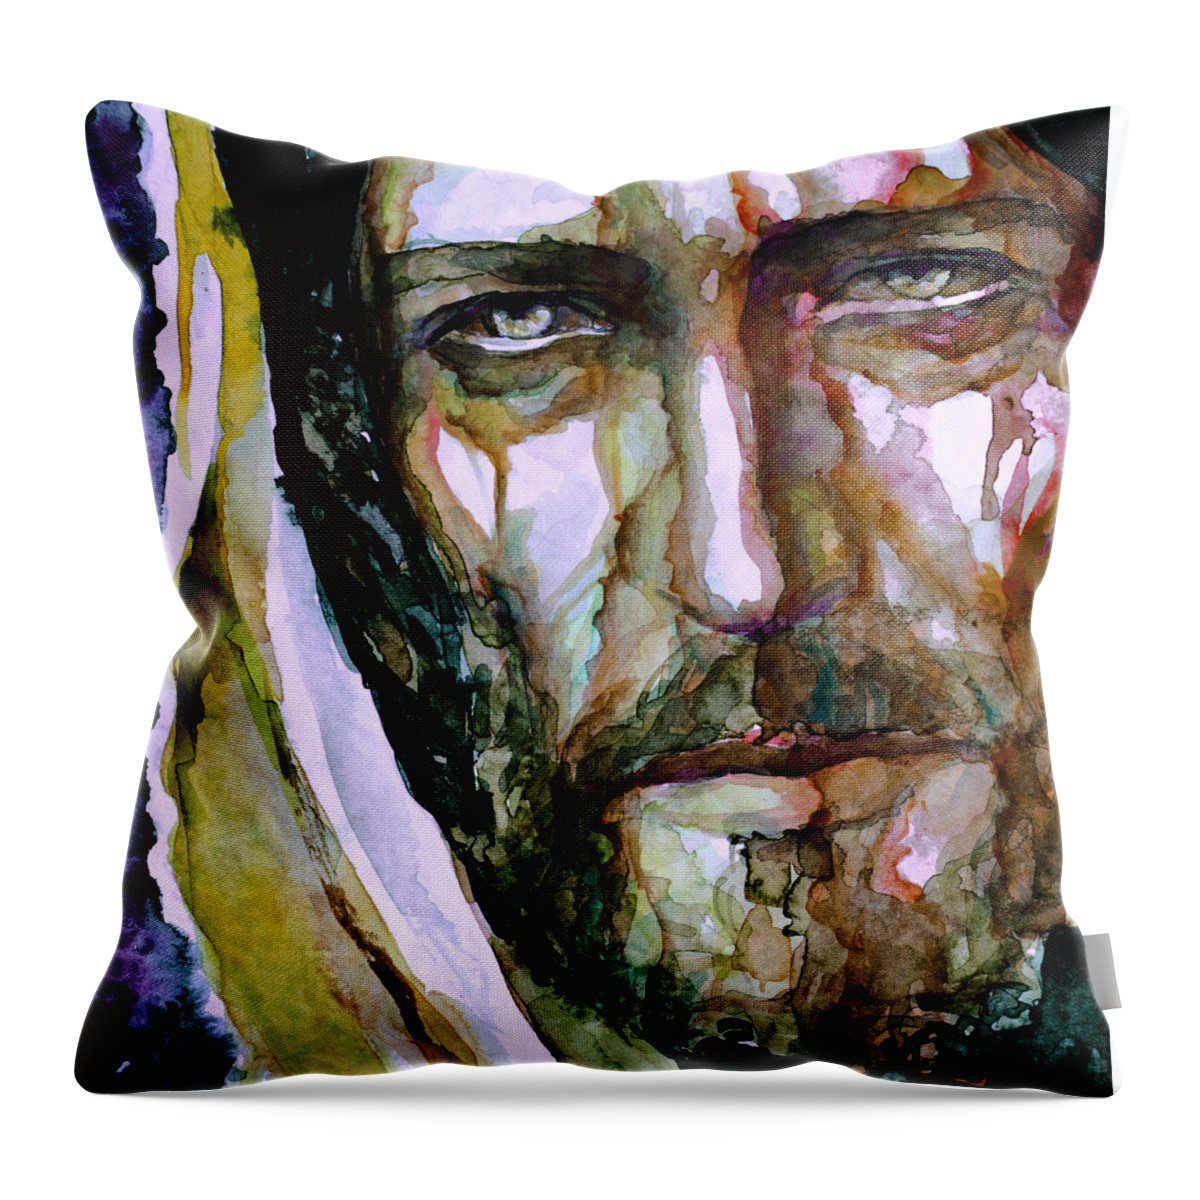 Jesus Throw Pillow featuring the painting The Suffering God 3 by Laur Iduc